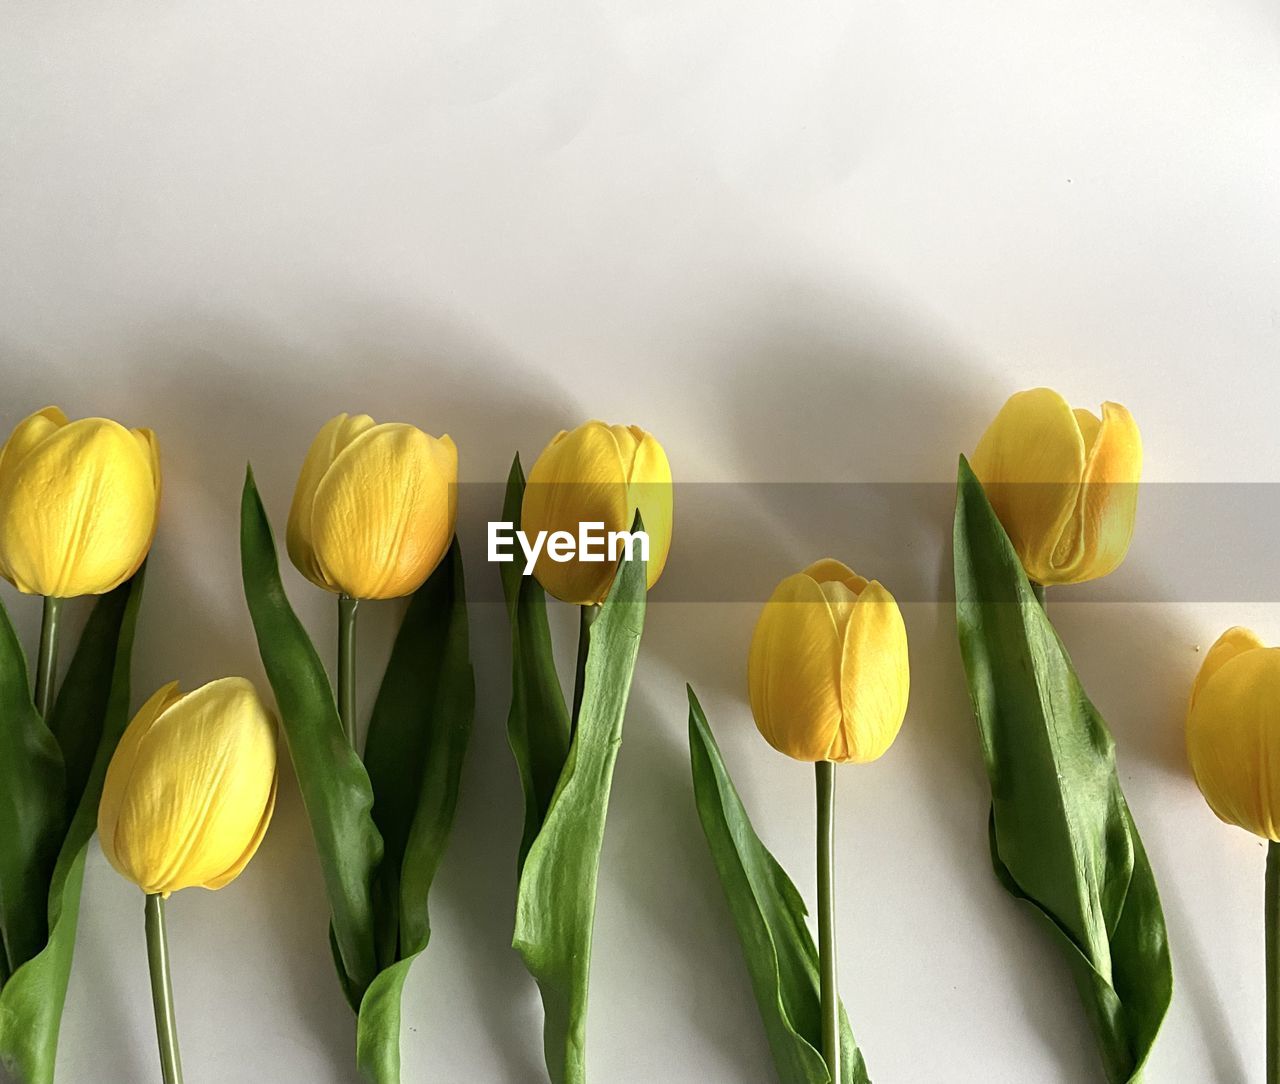 yellow, plant, flower, tulip, freshness, flowering plant, nature, beauty in nature, no people, green, close-up, indoors, plant part, leaf, fragility, flower head, studio shot, petal, plant stem, inflorescence, arrangement, springtime, multi colored, still life, food, copy space